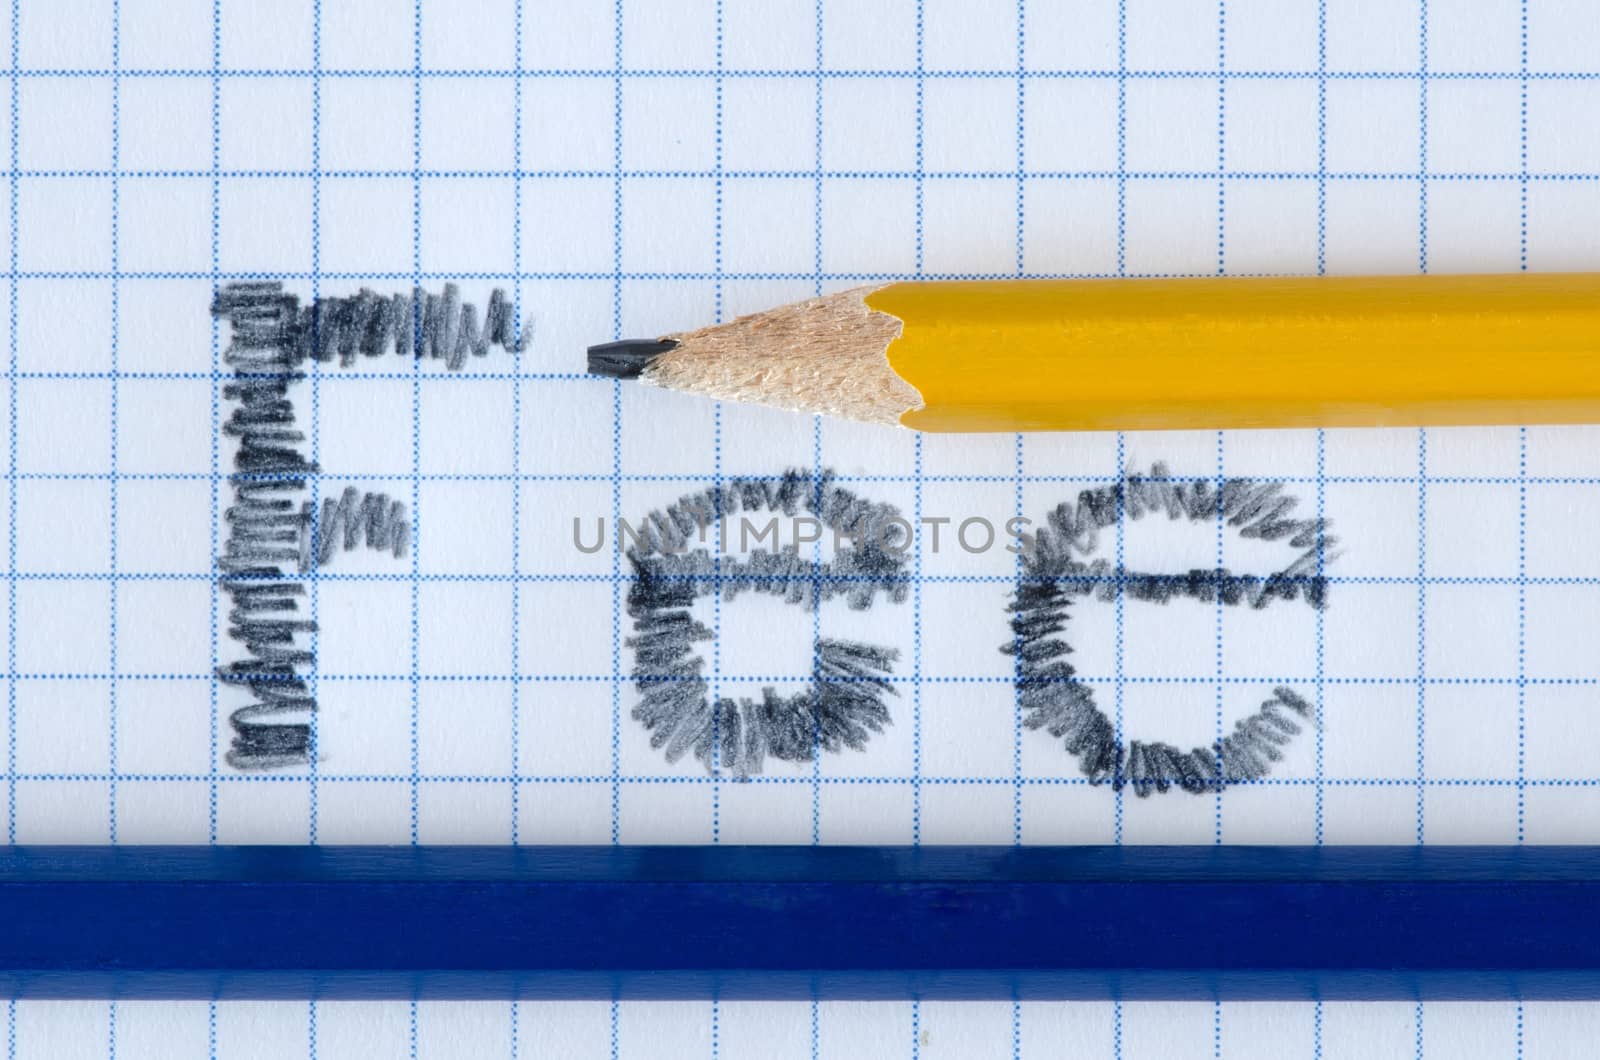 Fee word typed on white paper, yellow and blue pencil.